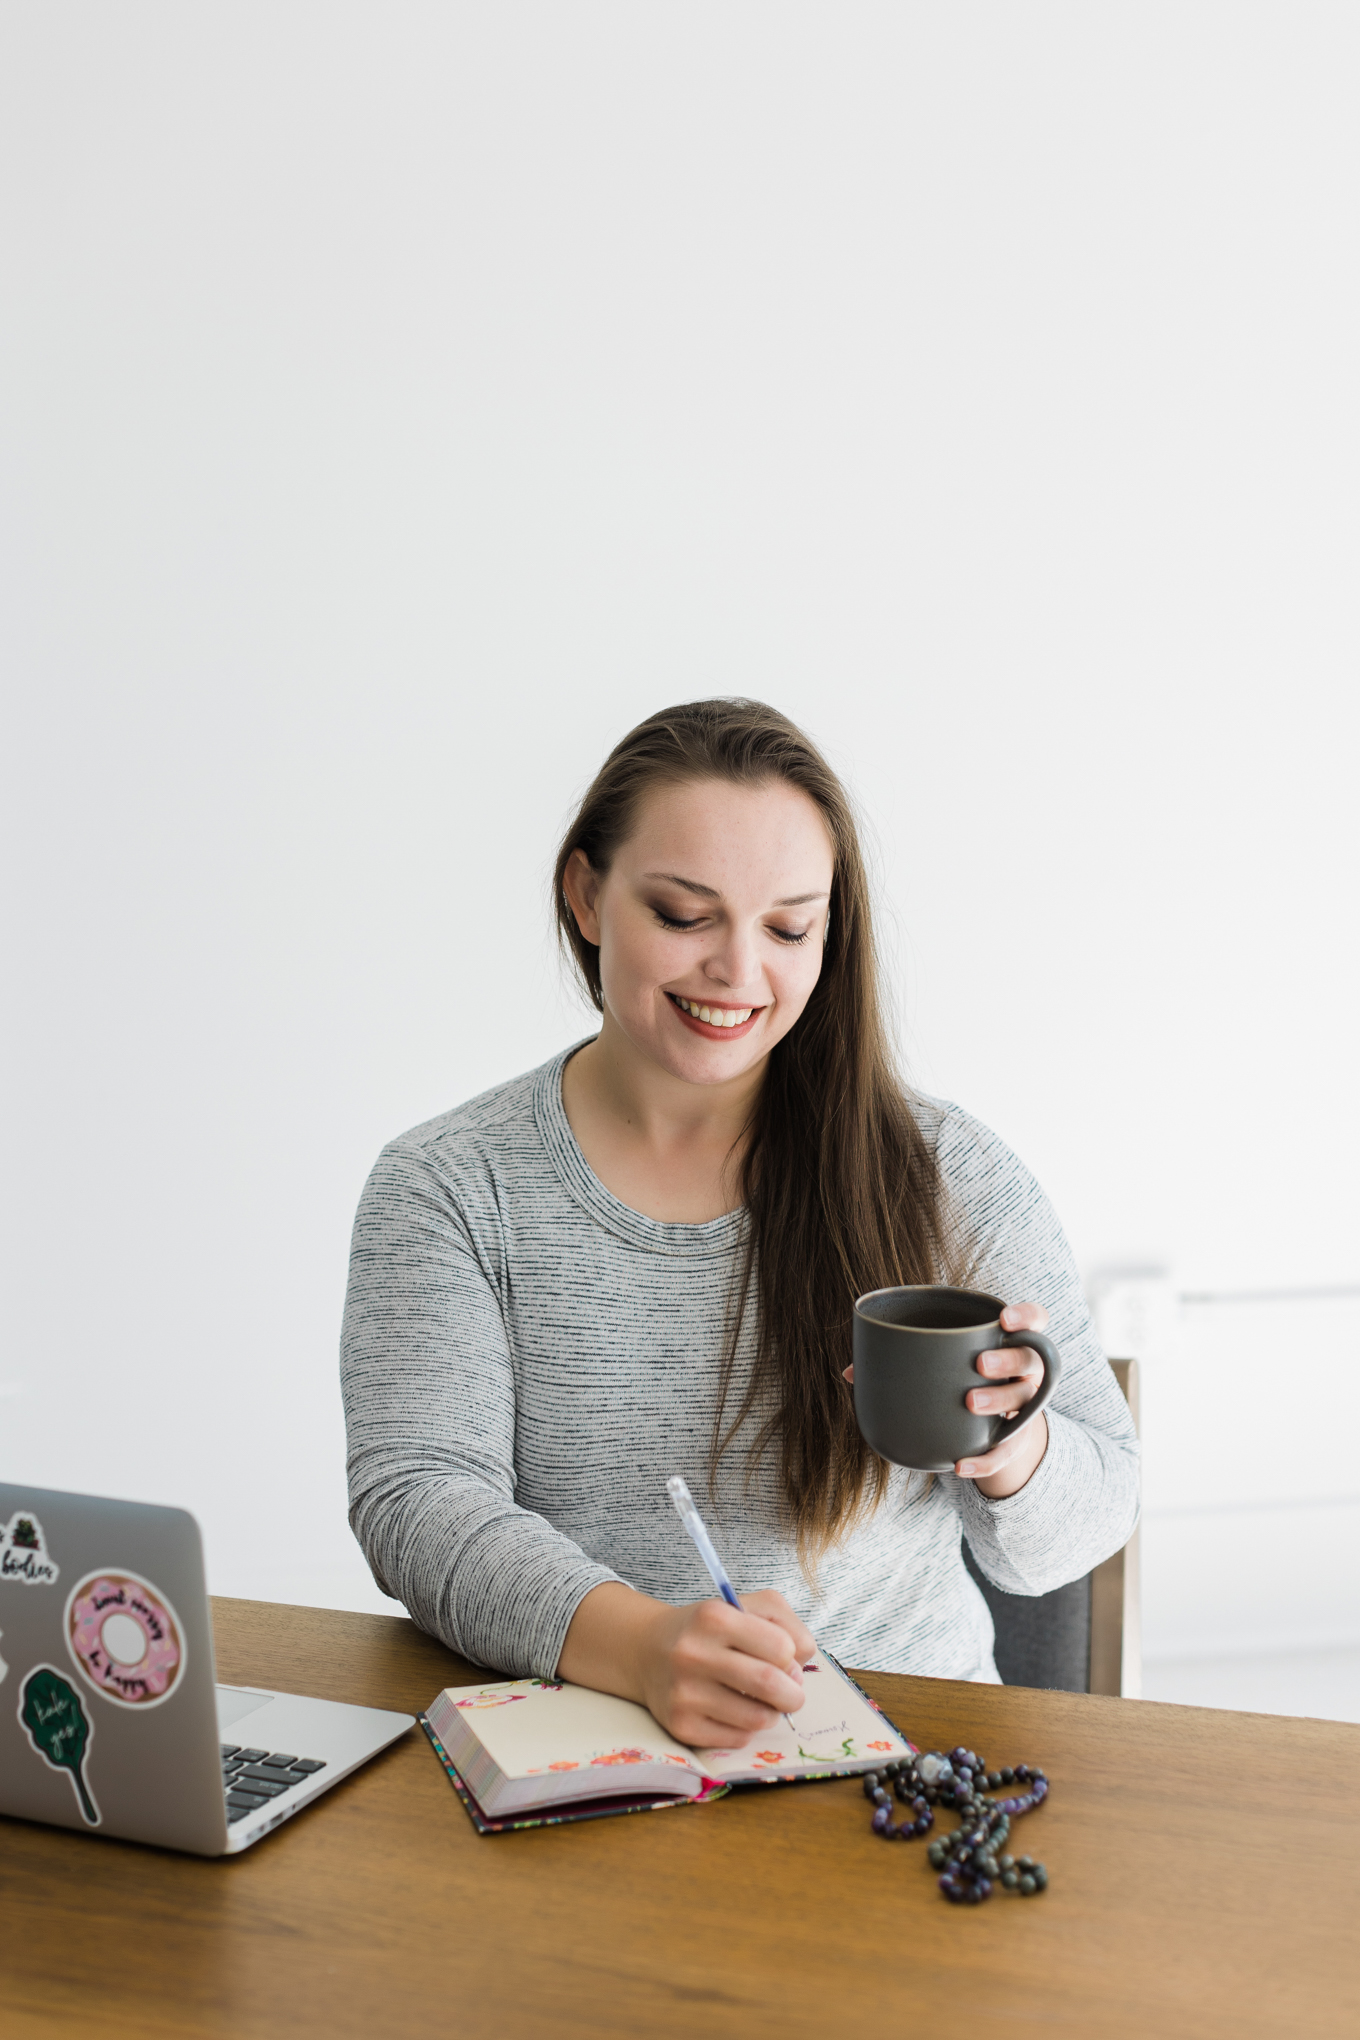 Dallas Brand Photographer; photo of a woman wearing a grey top smiling, holding a mug, and writing in a notebook on a desk with a laptop in front of a white background